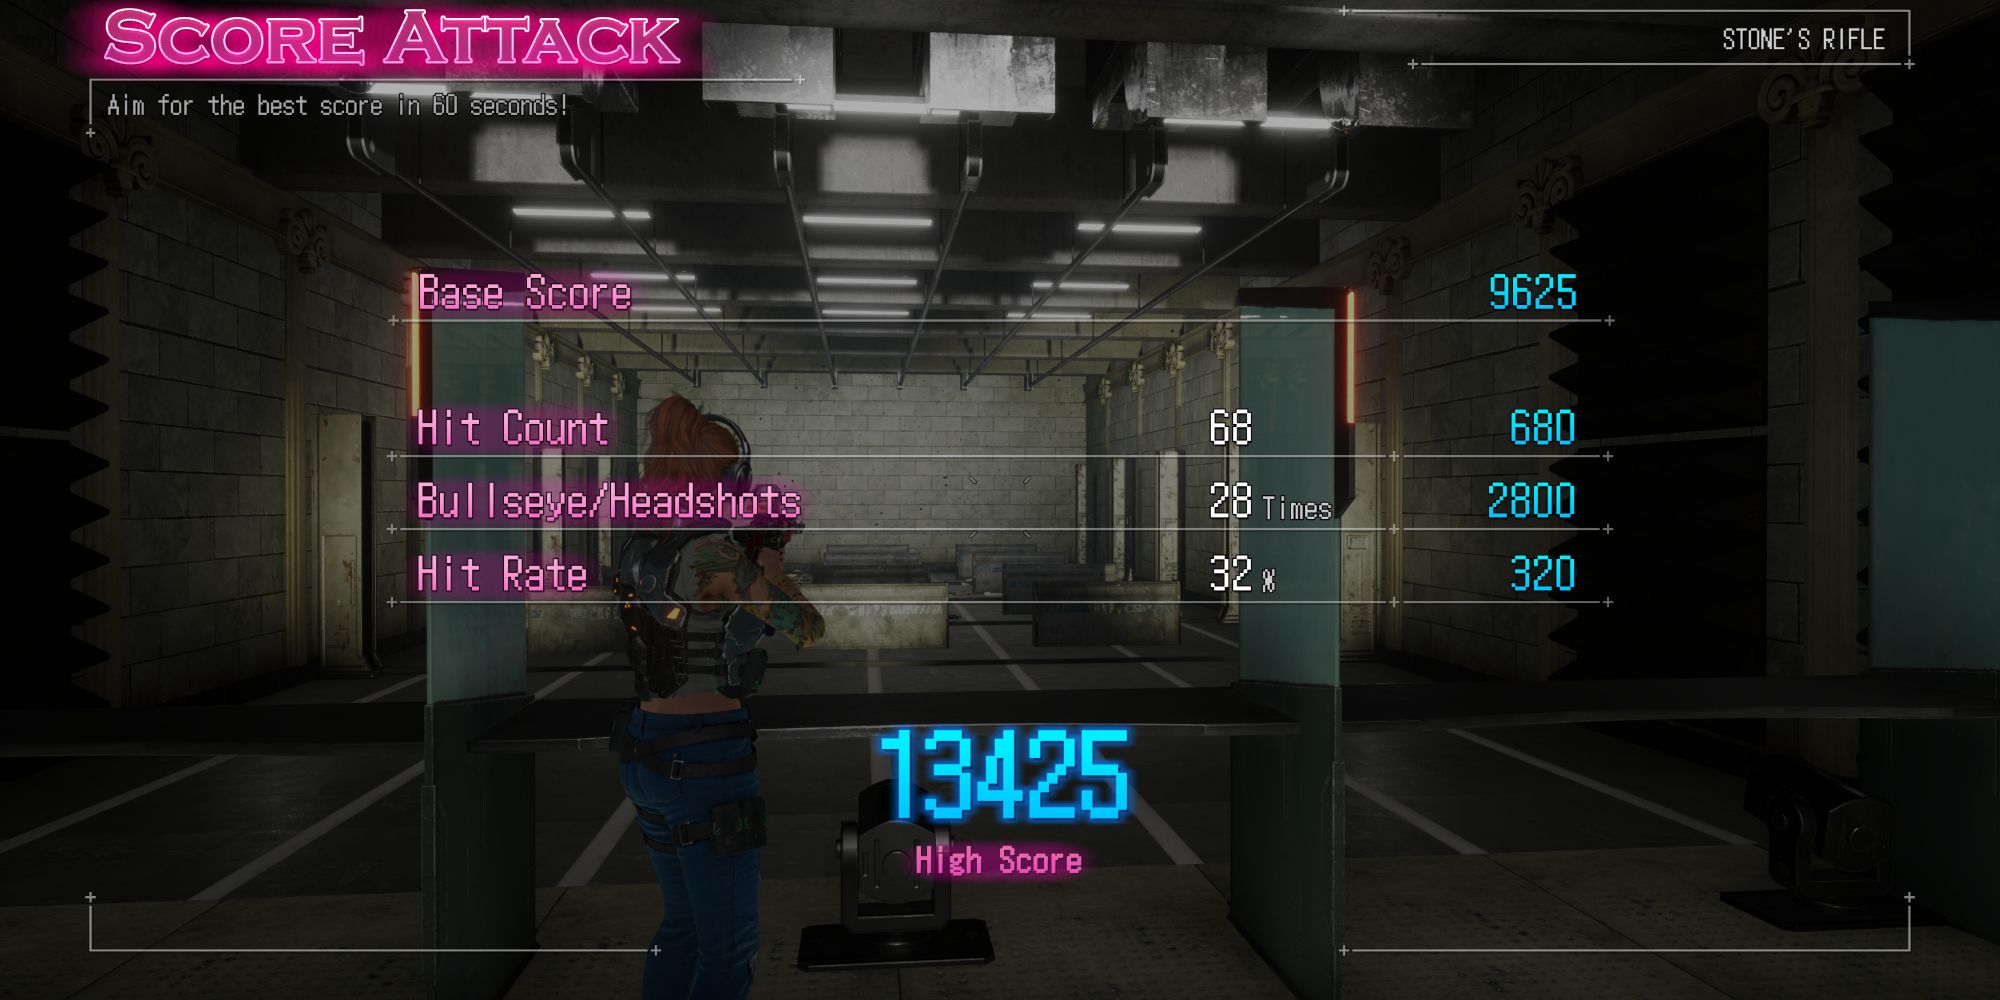 The results for the Score Attack Mini Game in the Firing Range of Wanted: Dead